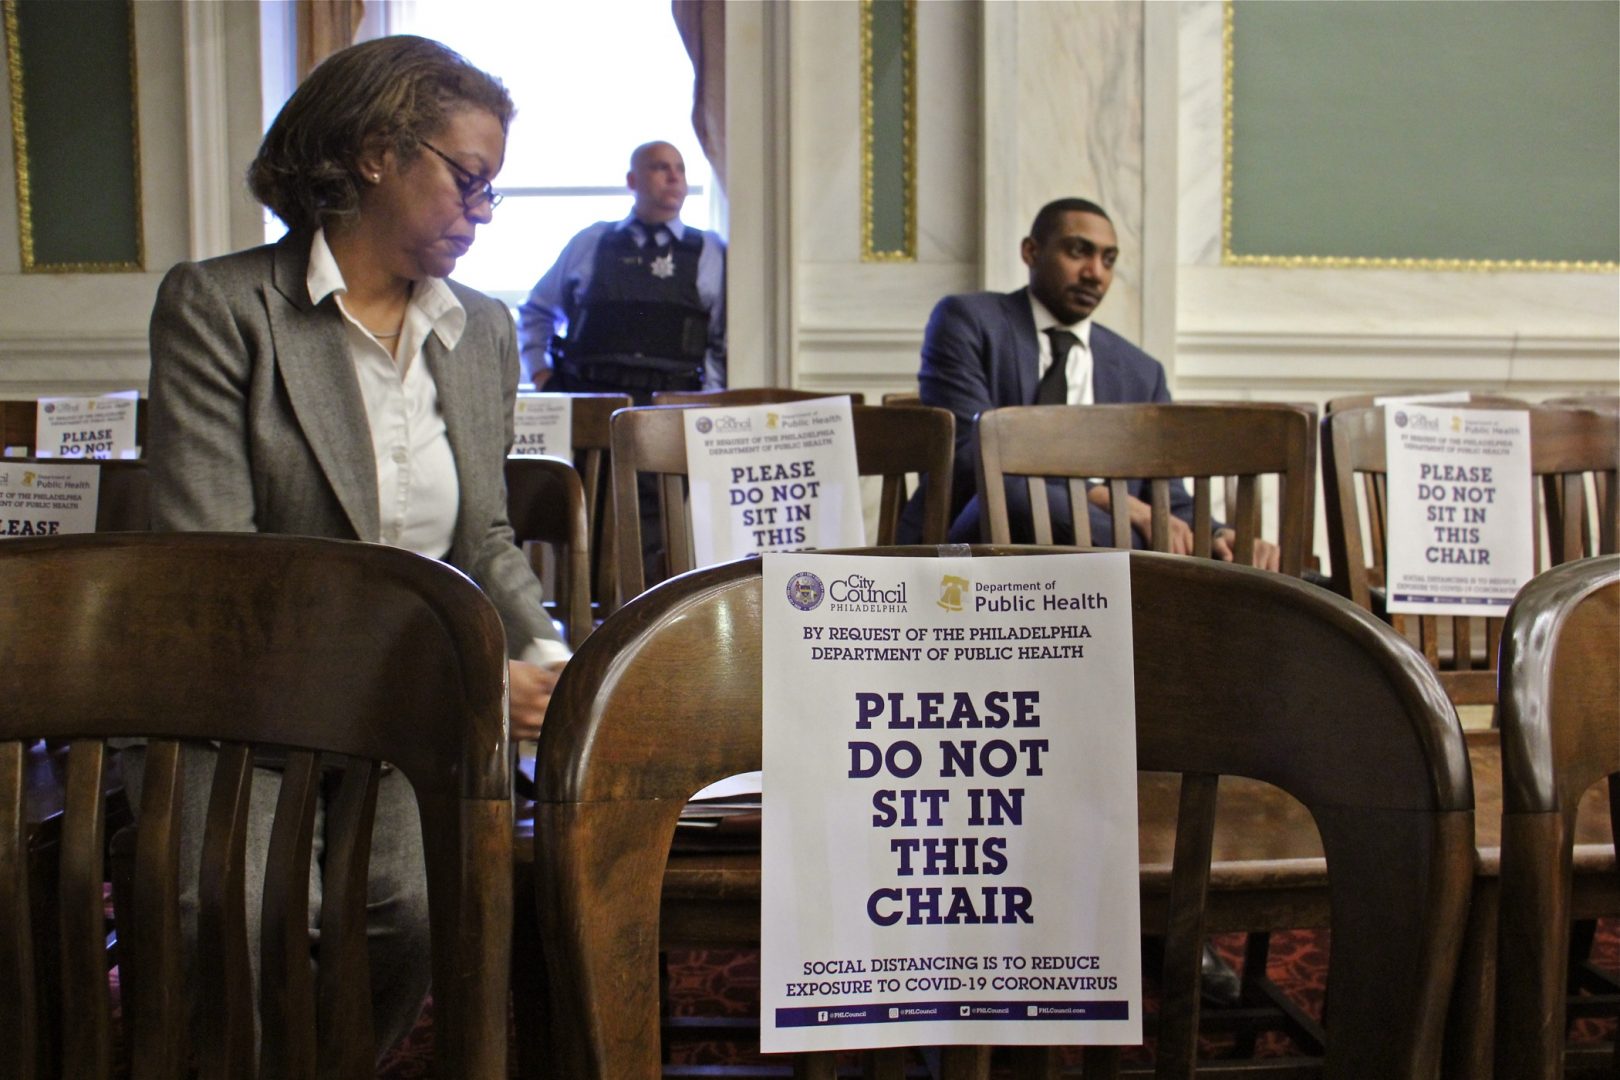 At Philadelphia City Council meeting, attendees were told to use every other chair to reduce the chances of exposure to coronavirus.